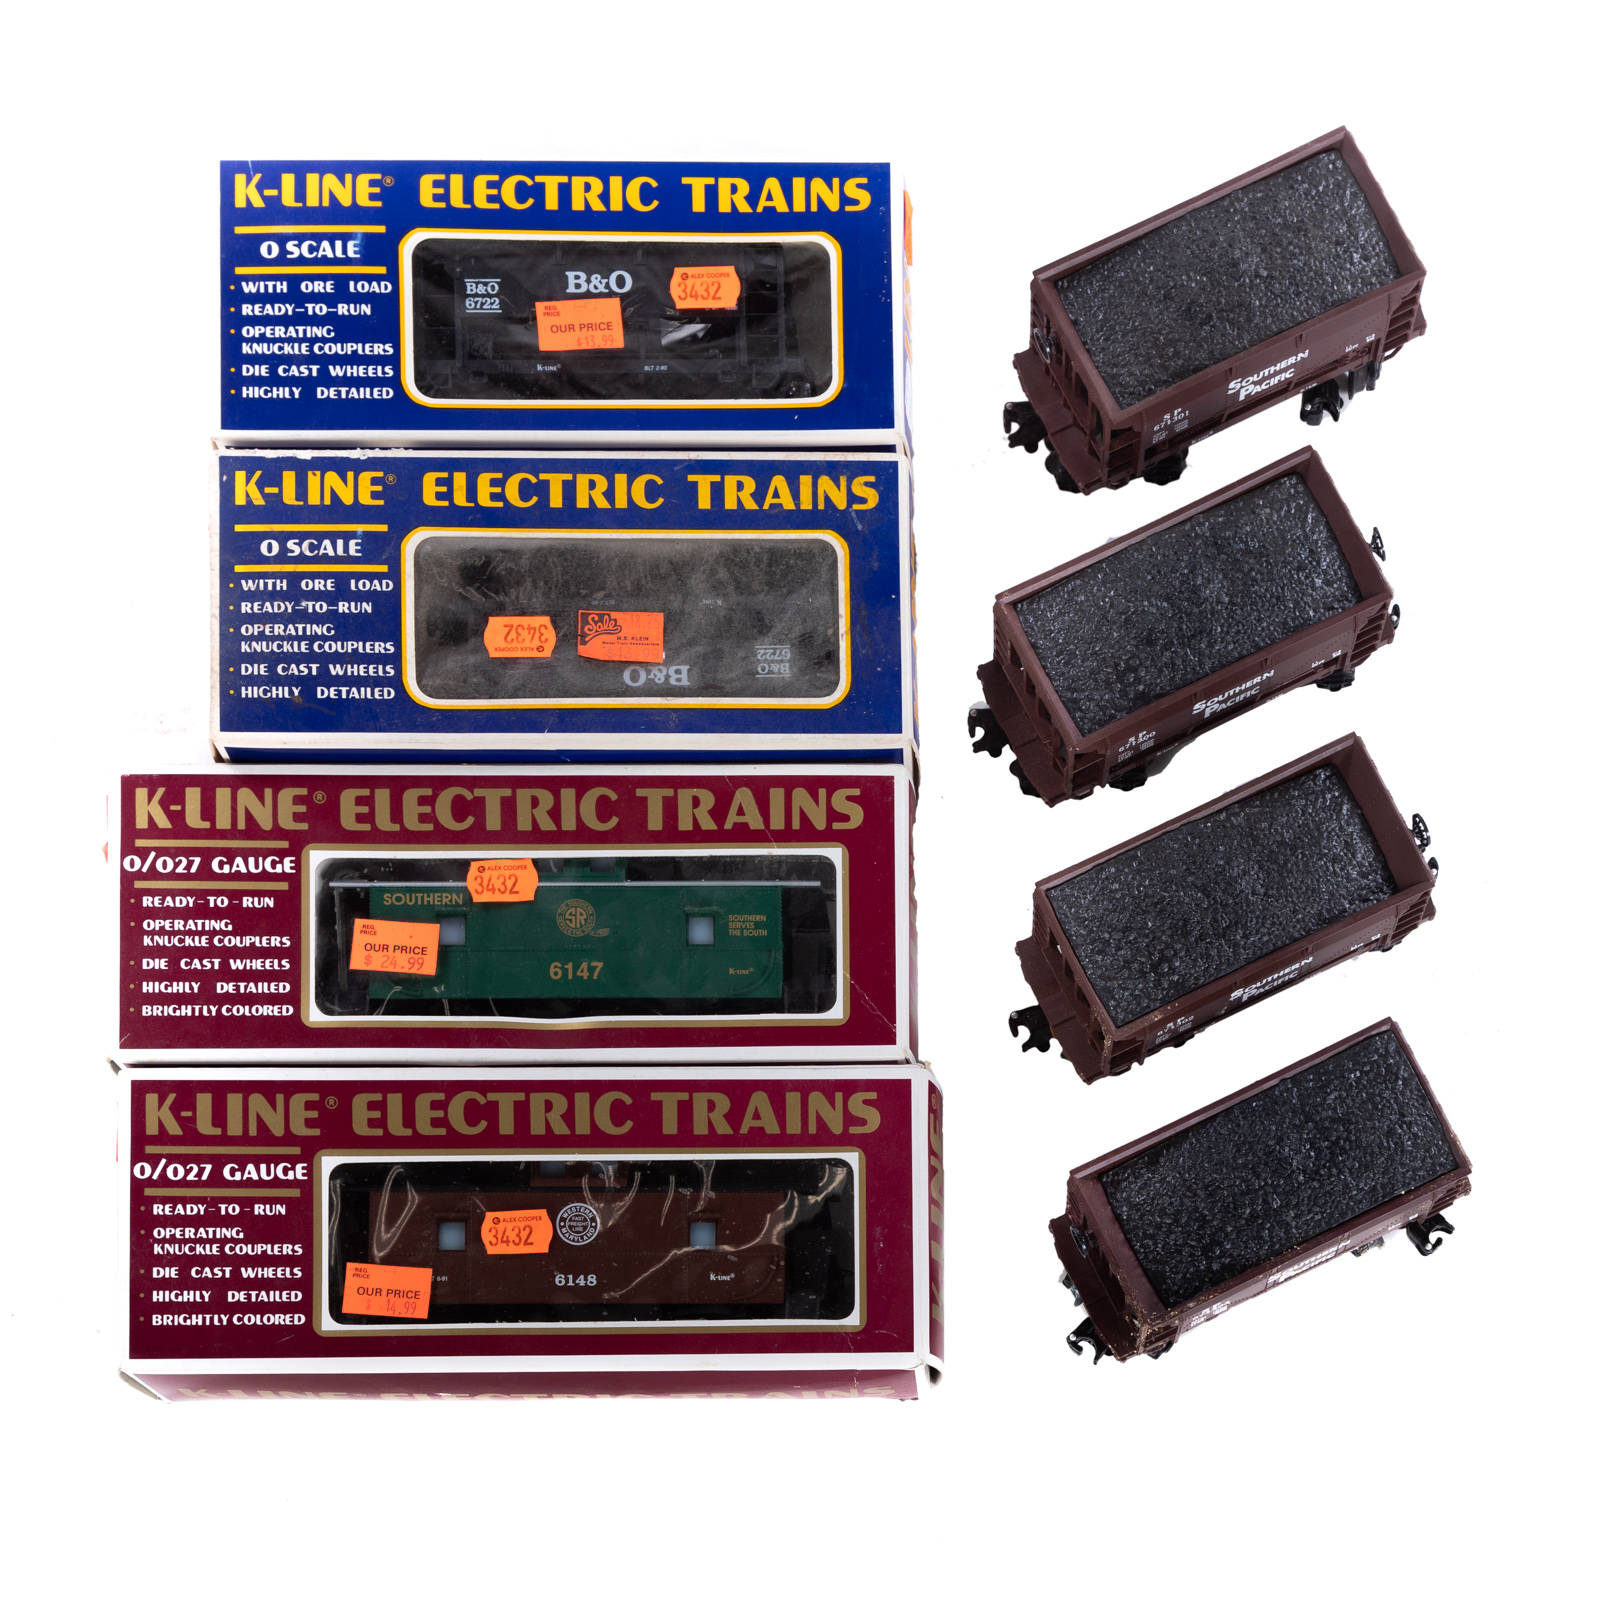 EIGHT K-LINE FREIGHT CARS Includes